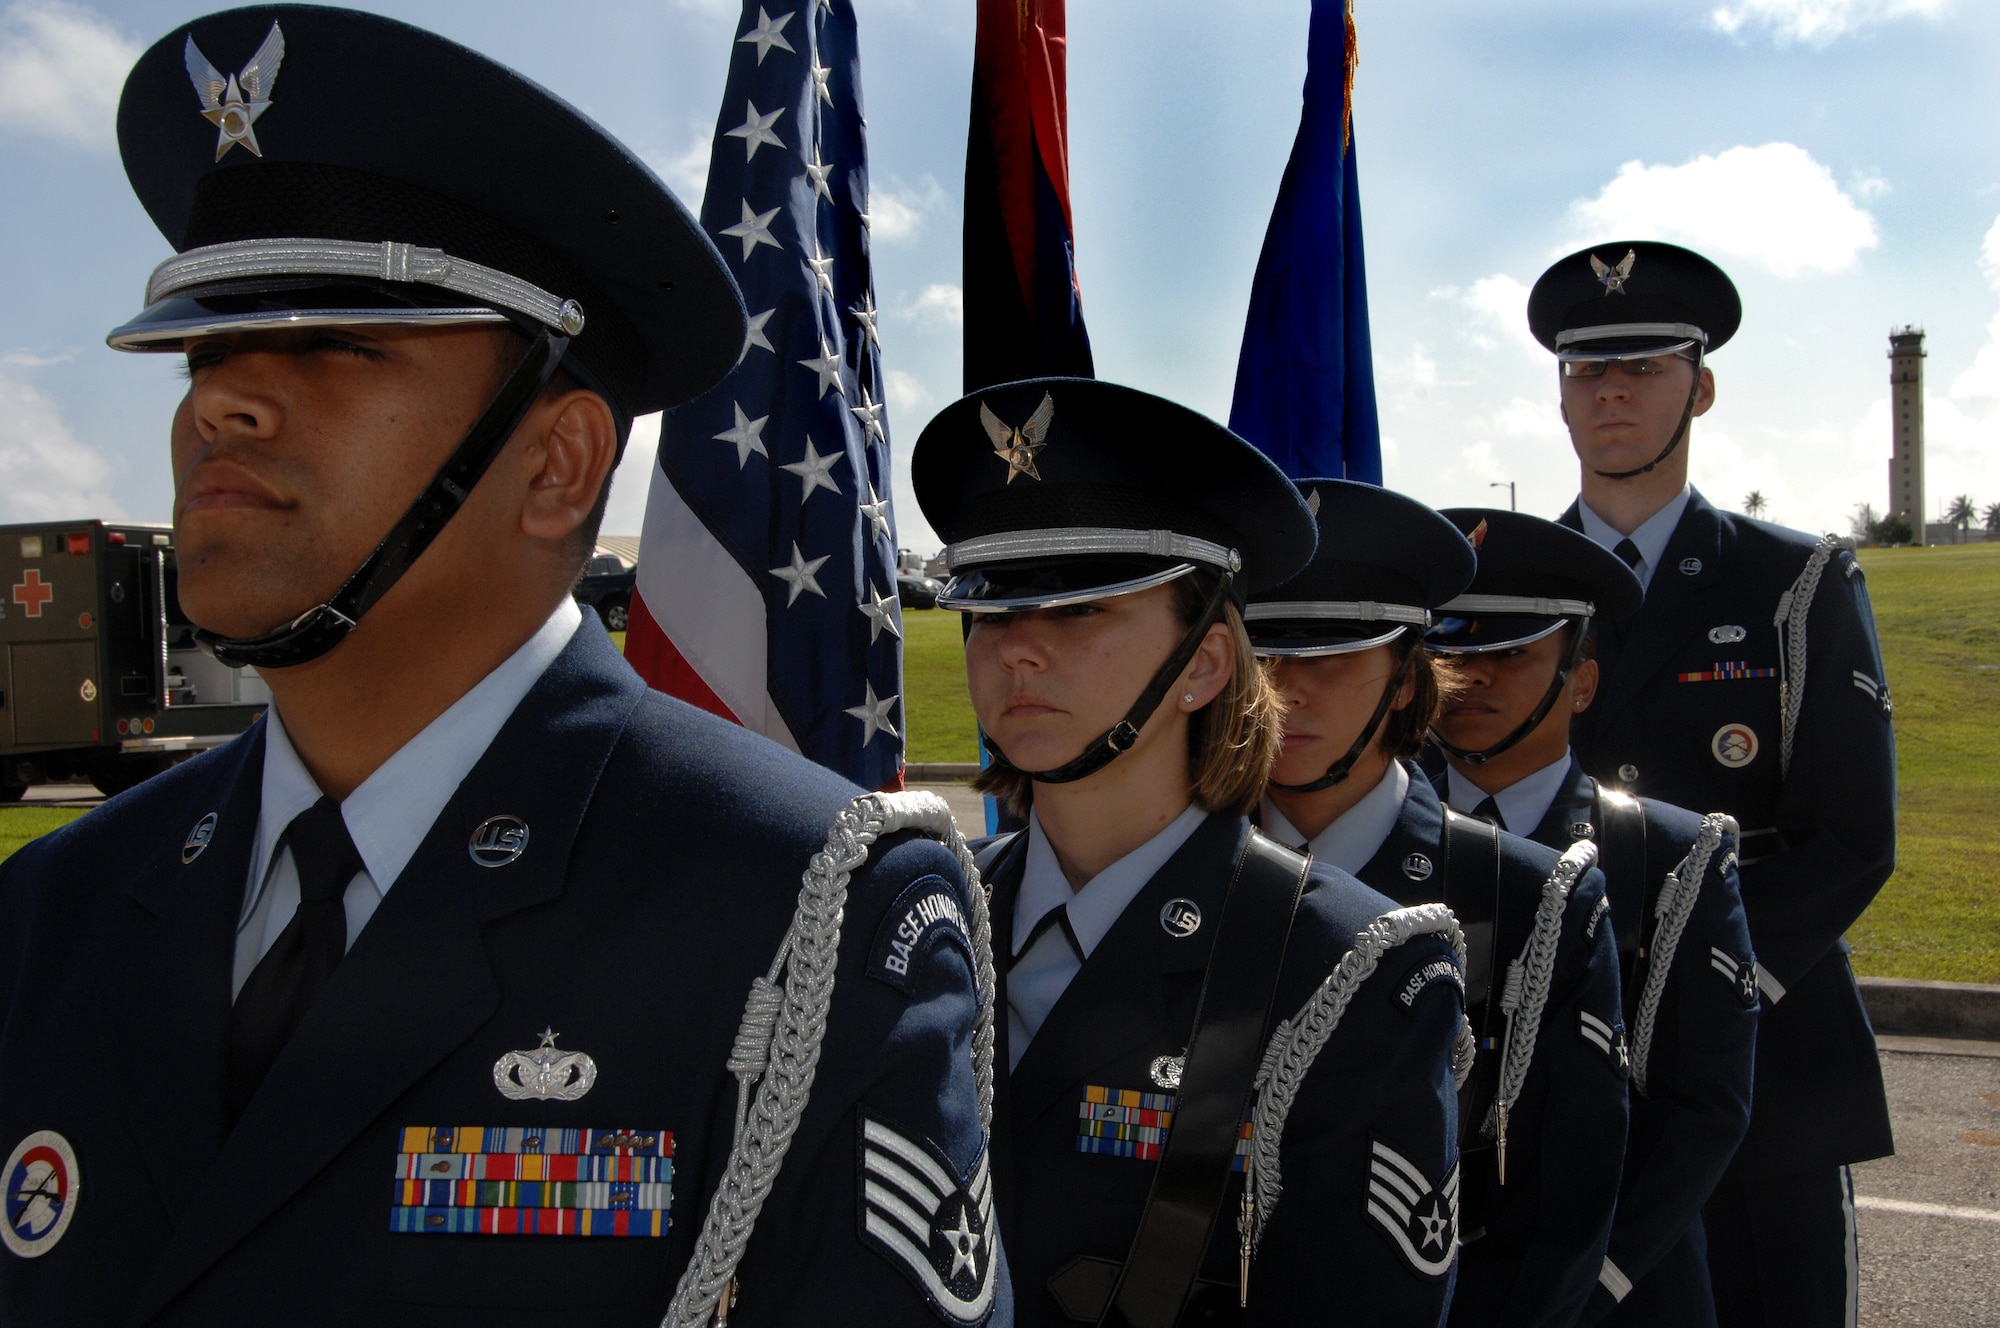 Team Andersen's Honor Guard awaits Presentation of Colors at the 36th Mobility Response Squadron Assumption of Command on June 30. The Team Andersen Honor Guard's primary mission is to provide final military honors to our fallen military members.   (U.S. Air Force photo by Airman 1st Class Courtney Witt)